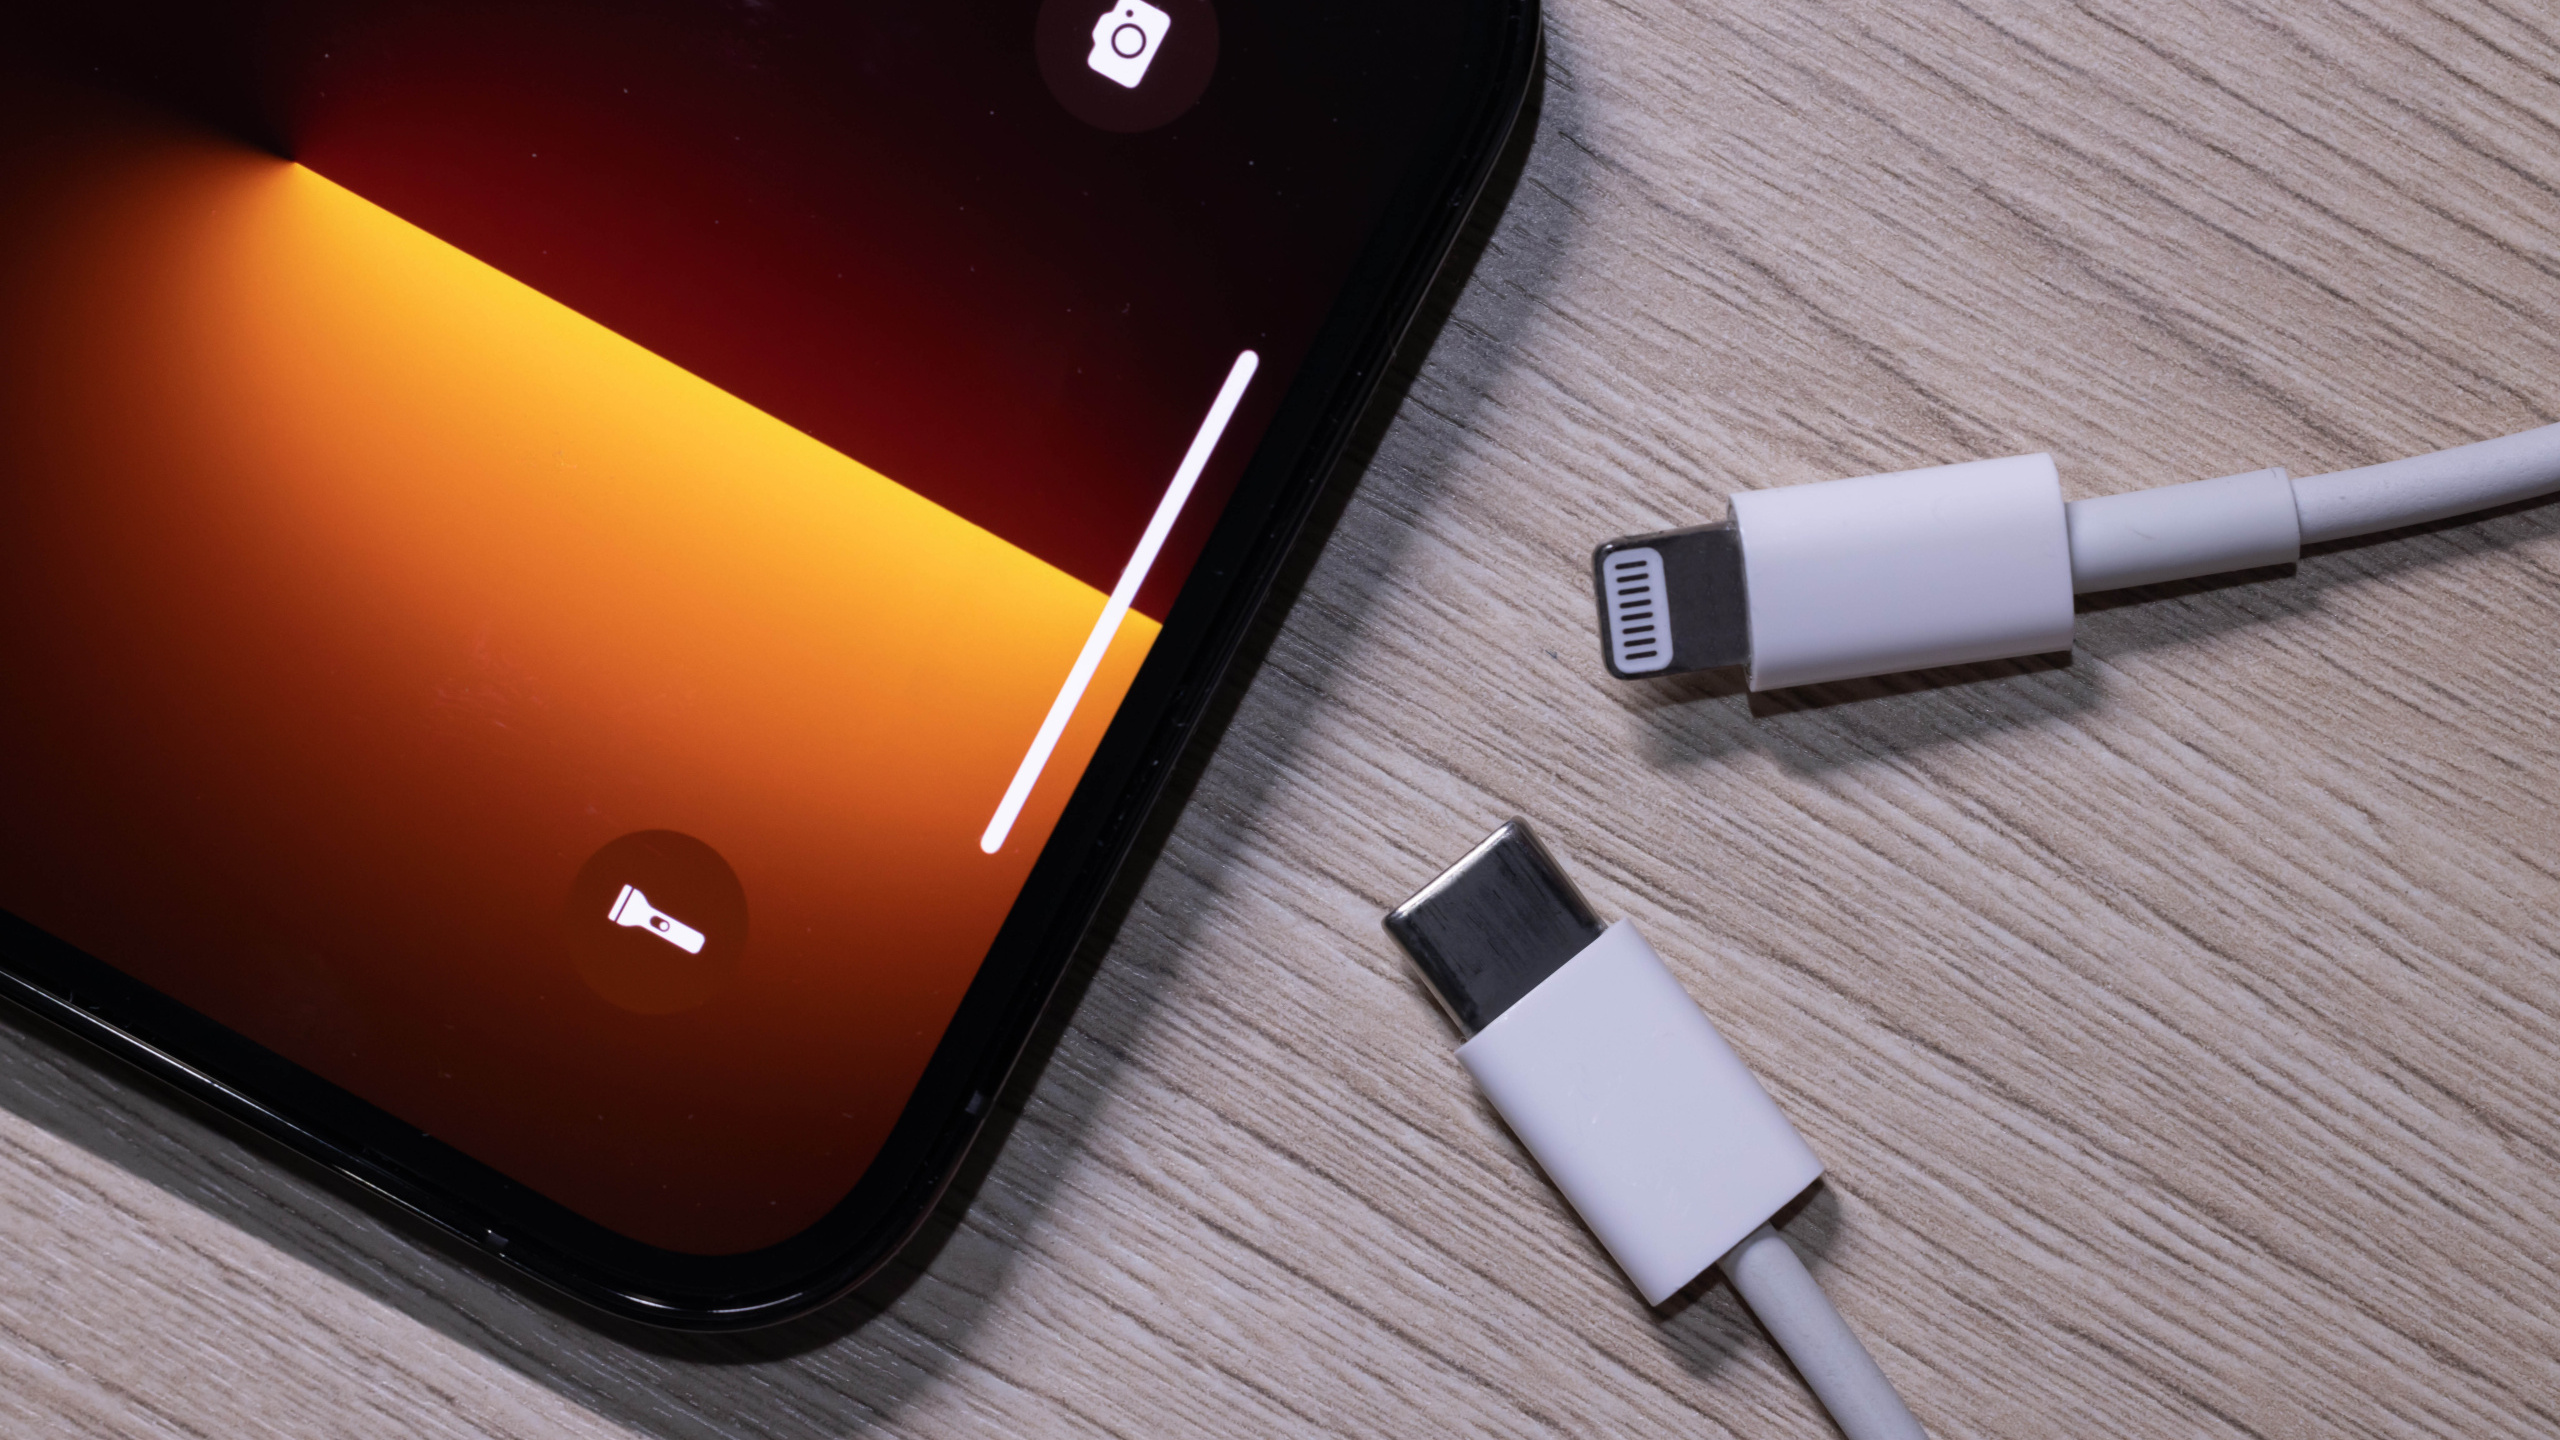 Which is superior: USB-C or Lightning?